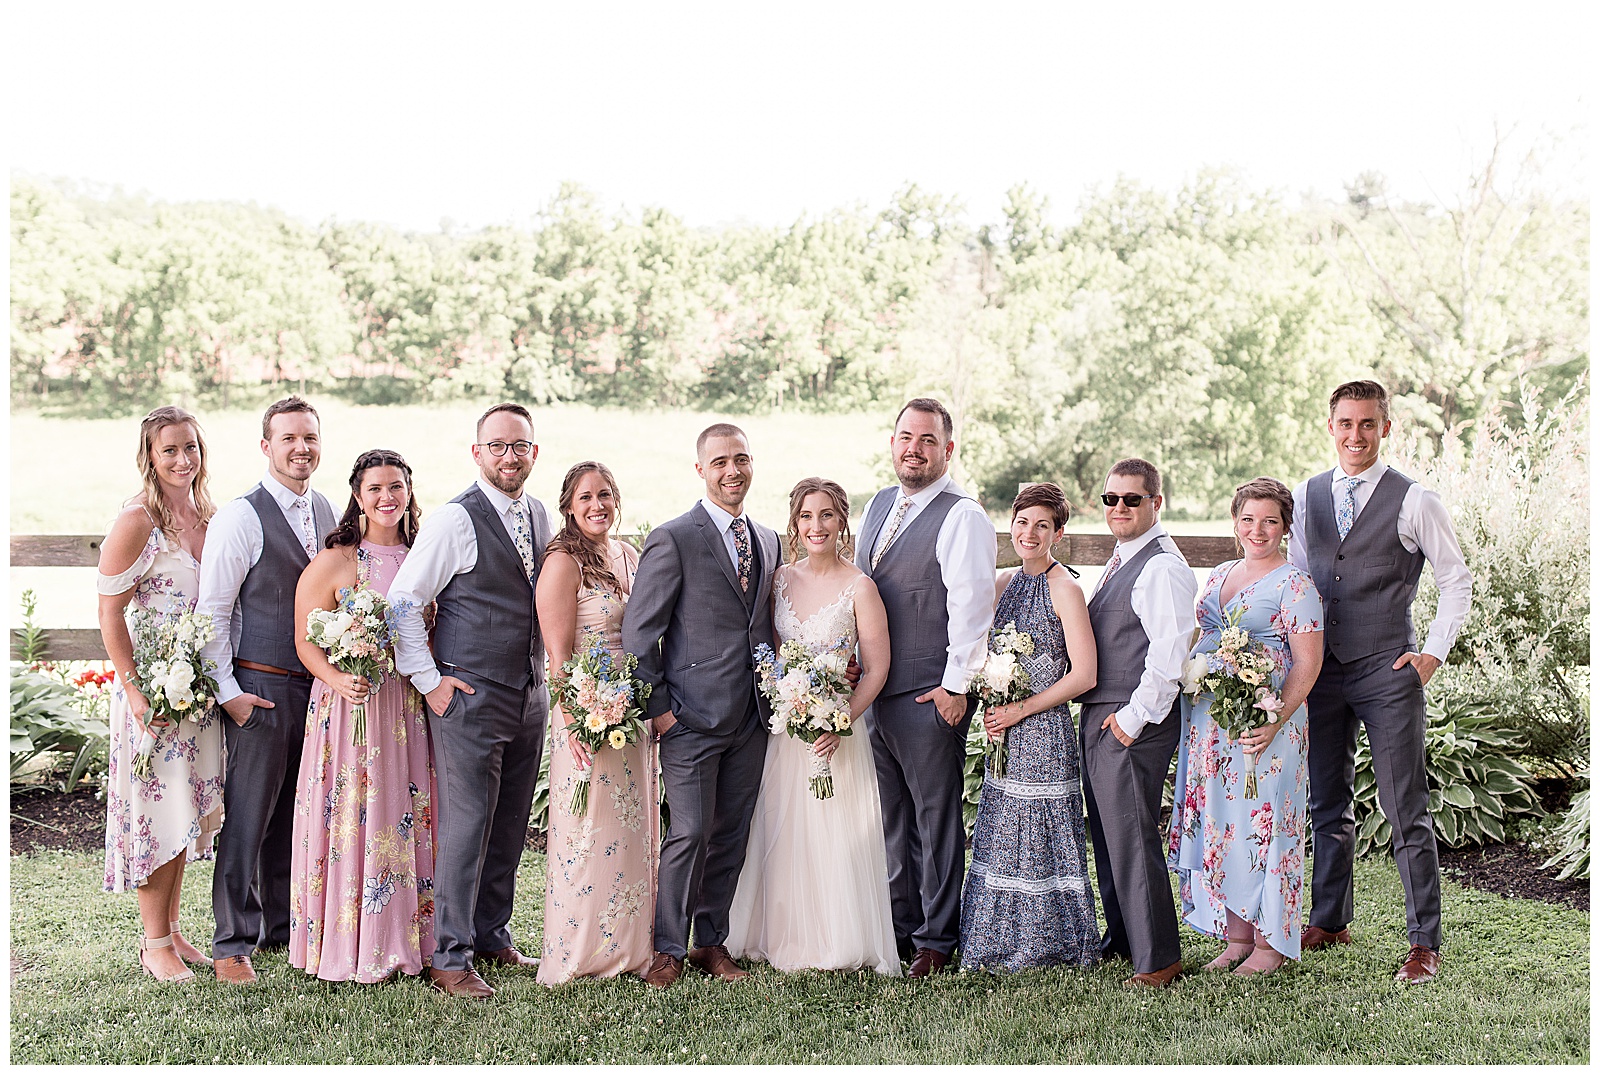 bridal party - bridesmaids in floral dresses and groomsmen's ties matching